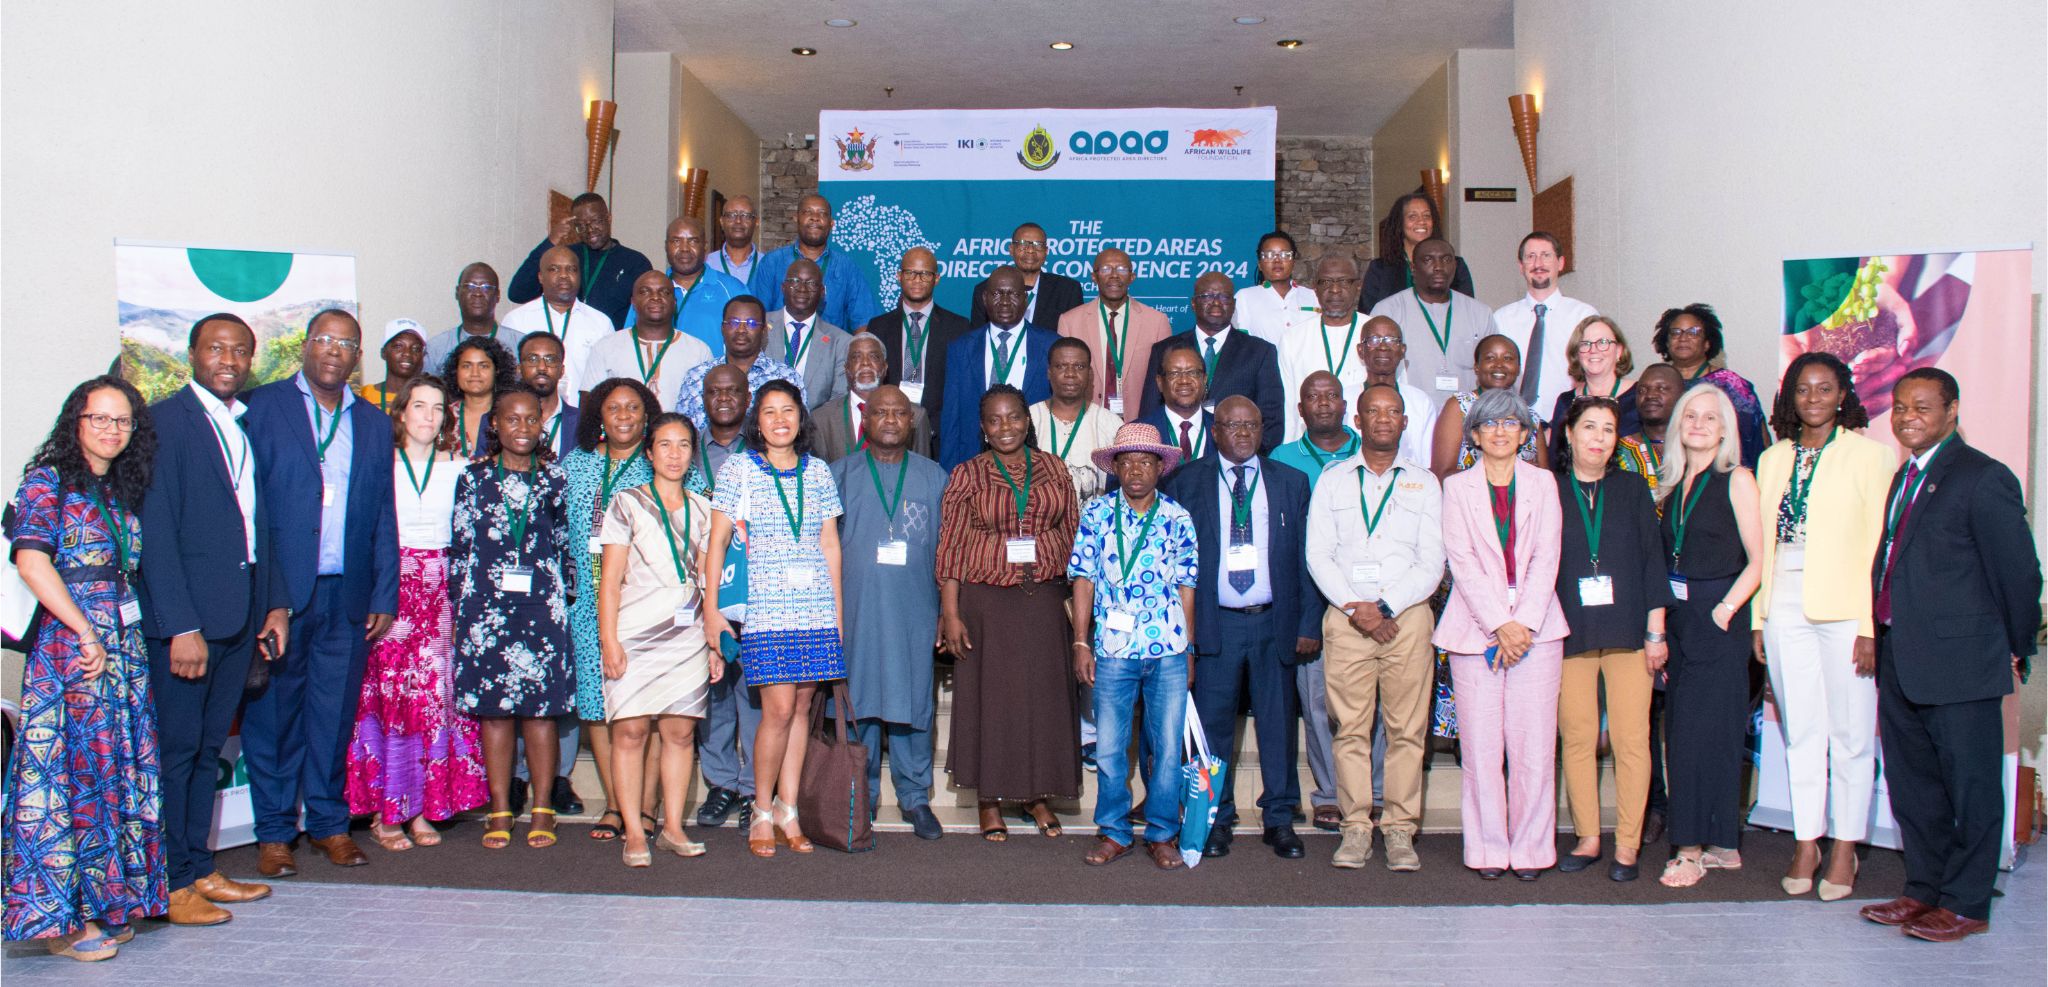 The Second Africa Protected Area Directors (APAD) Conference 2024